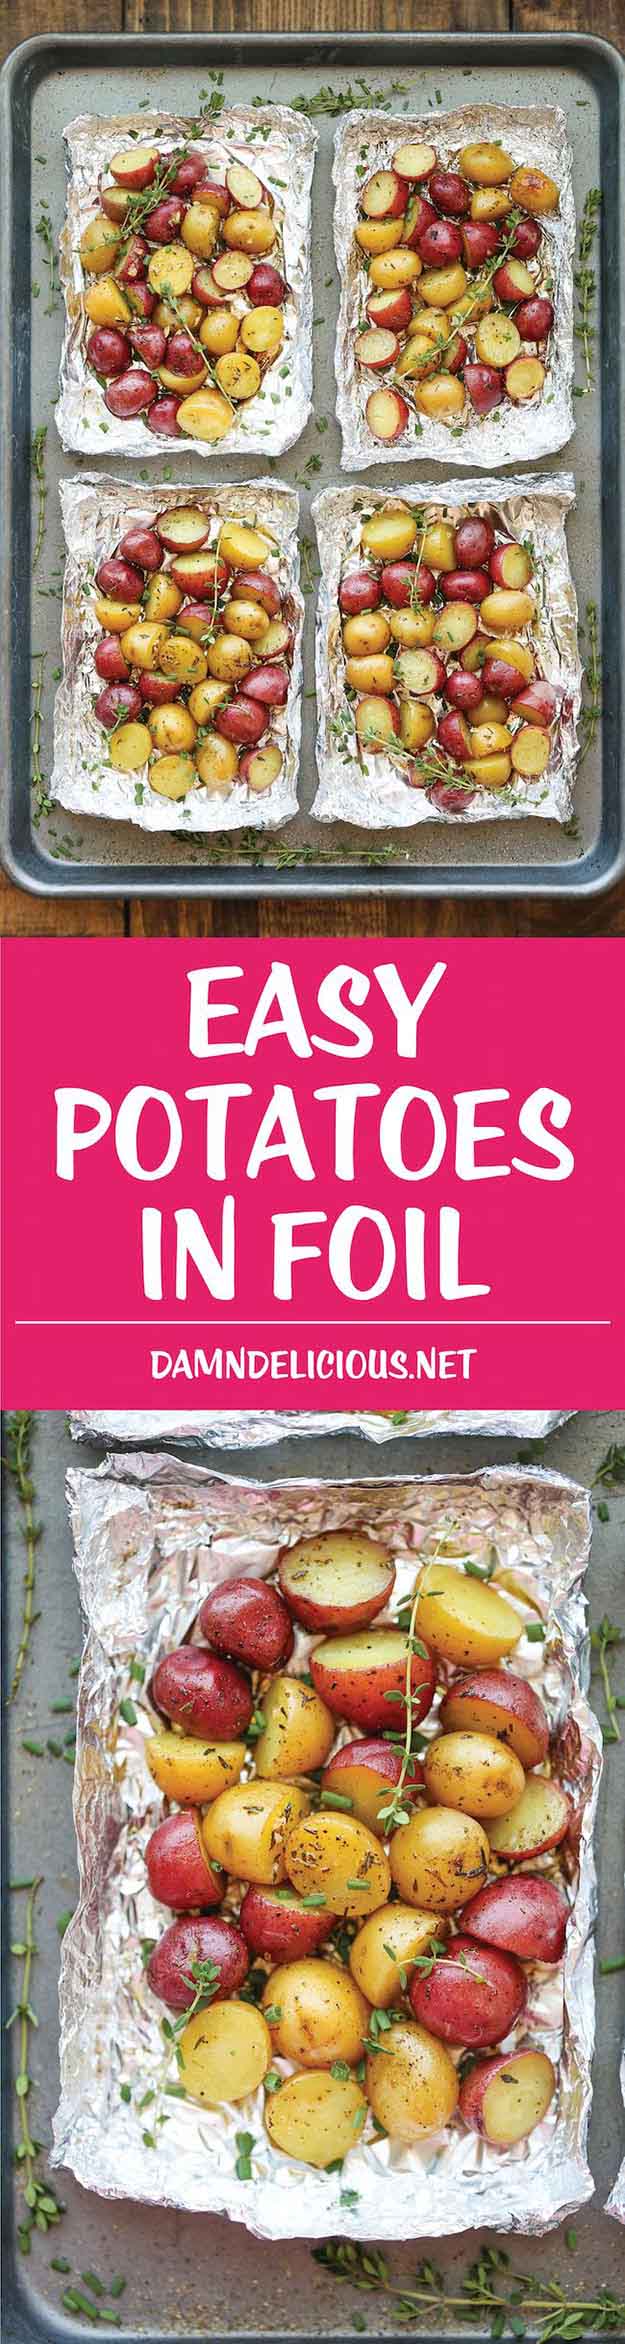 Quick & Easy Vegetable Grilling Recipes | Vegetarian Foil Grilling Recipe Ideas | Herb Potatoes on the Grill | DIY Projects & Crafts by DIY JOY at http://diyjoy.com/grilling-recipes-diy-bbq-ideas